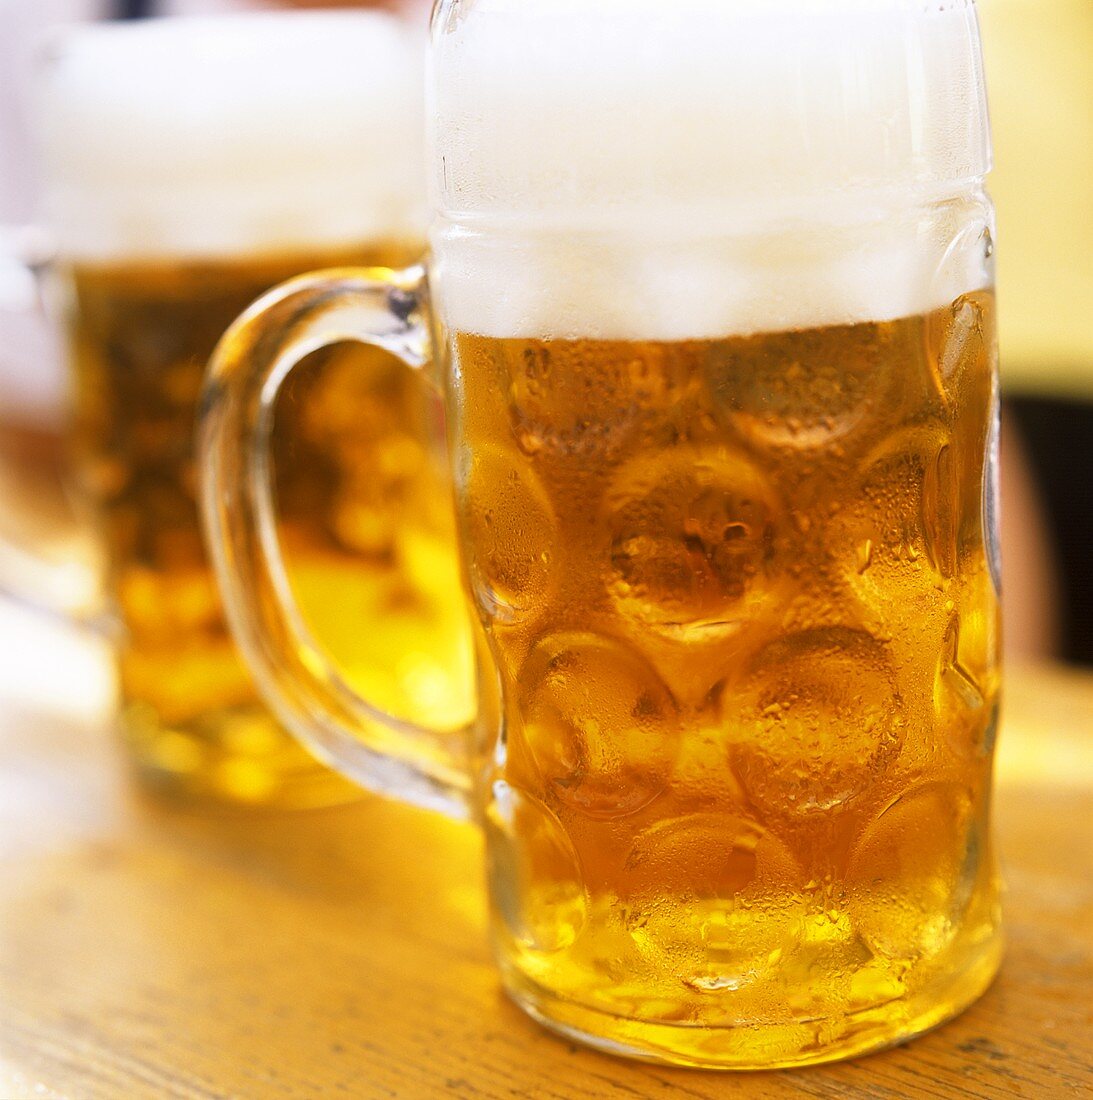 Two tankards of cold beer on a wooden table